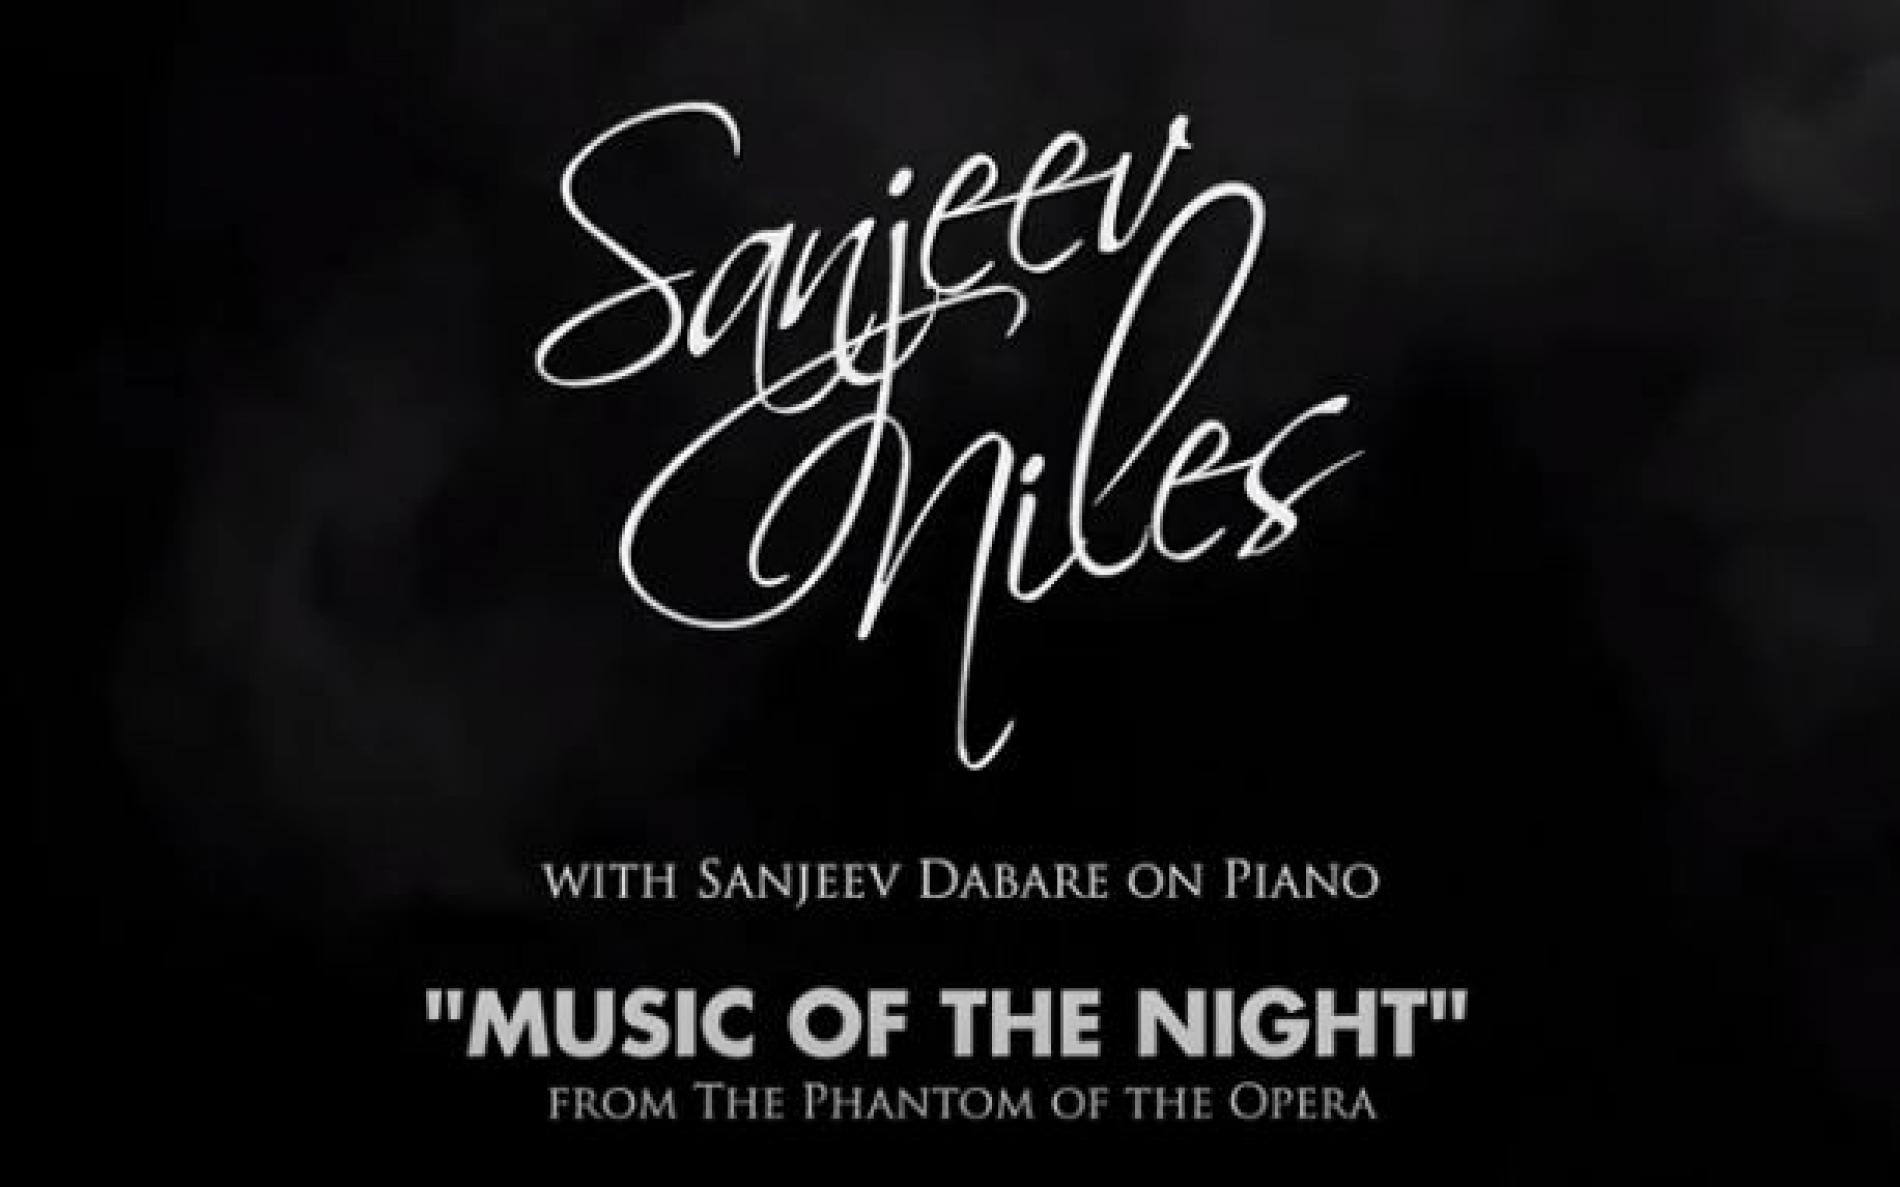 New Music : “Music Of The Night” From The Phantom Of The Opera – Sanjeev Niles (vocals) & Sanjeev Dabare (piano)